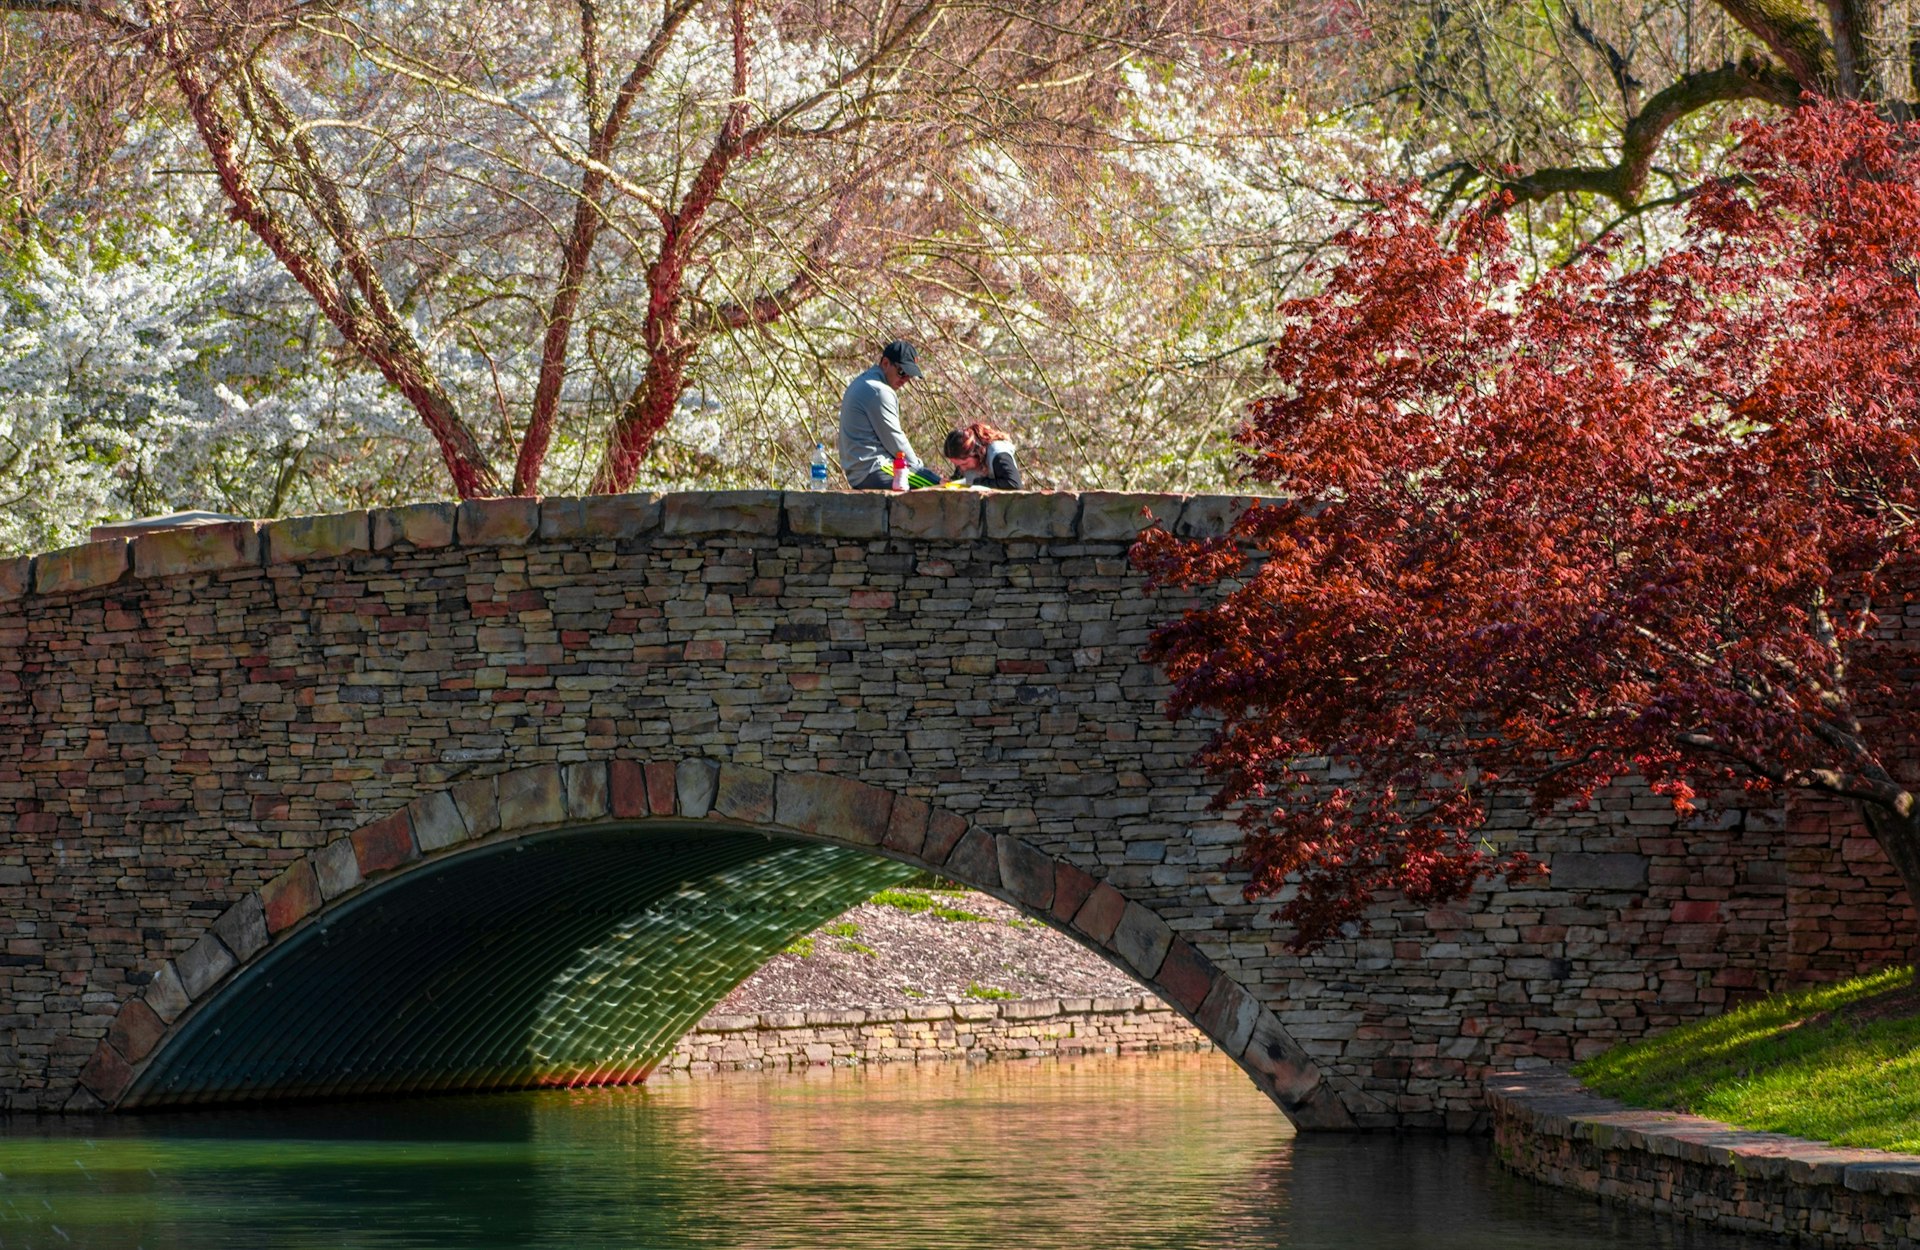 A man sitting on the stone bridge at Freedom Park in Charlotte, NC looks down at a woman who appears to be drawing. There is a body of water under the bridge and a blooming tree on the right side of the image. 